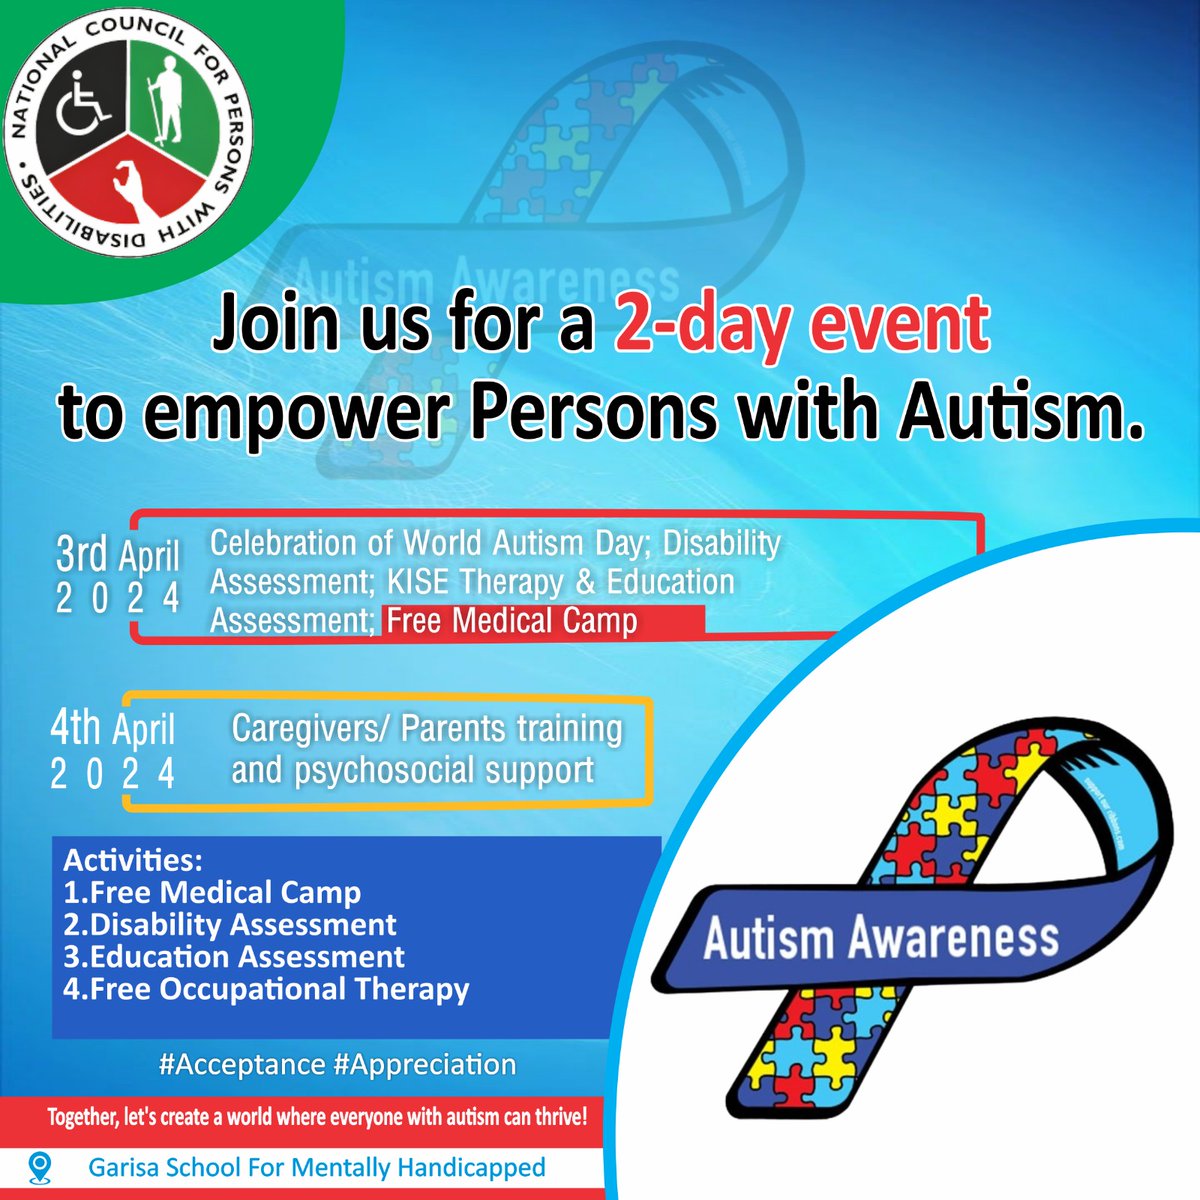 𝖶𝗈𝗋𝗅𝖽 𝖠𝗎𝗍𝗂𝗌𝗆 𝖠𝗐𝖺𝗋𝖾𝗇𝖾𝗌𝗌 𝖬𝗈𝗇𝗍𝗁. @Ncpwds & stakeholders commemorate #AutismAwarenessMonth @Garissacounty This year's theme: 'Moving from Surviving to Thriving.' #Acceptance #appreciation